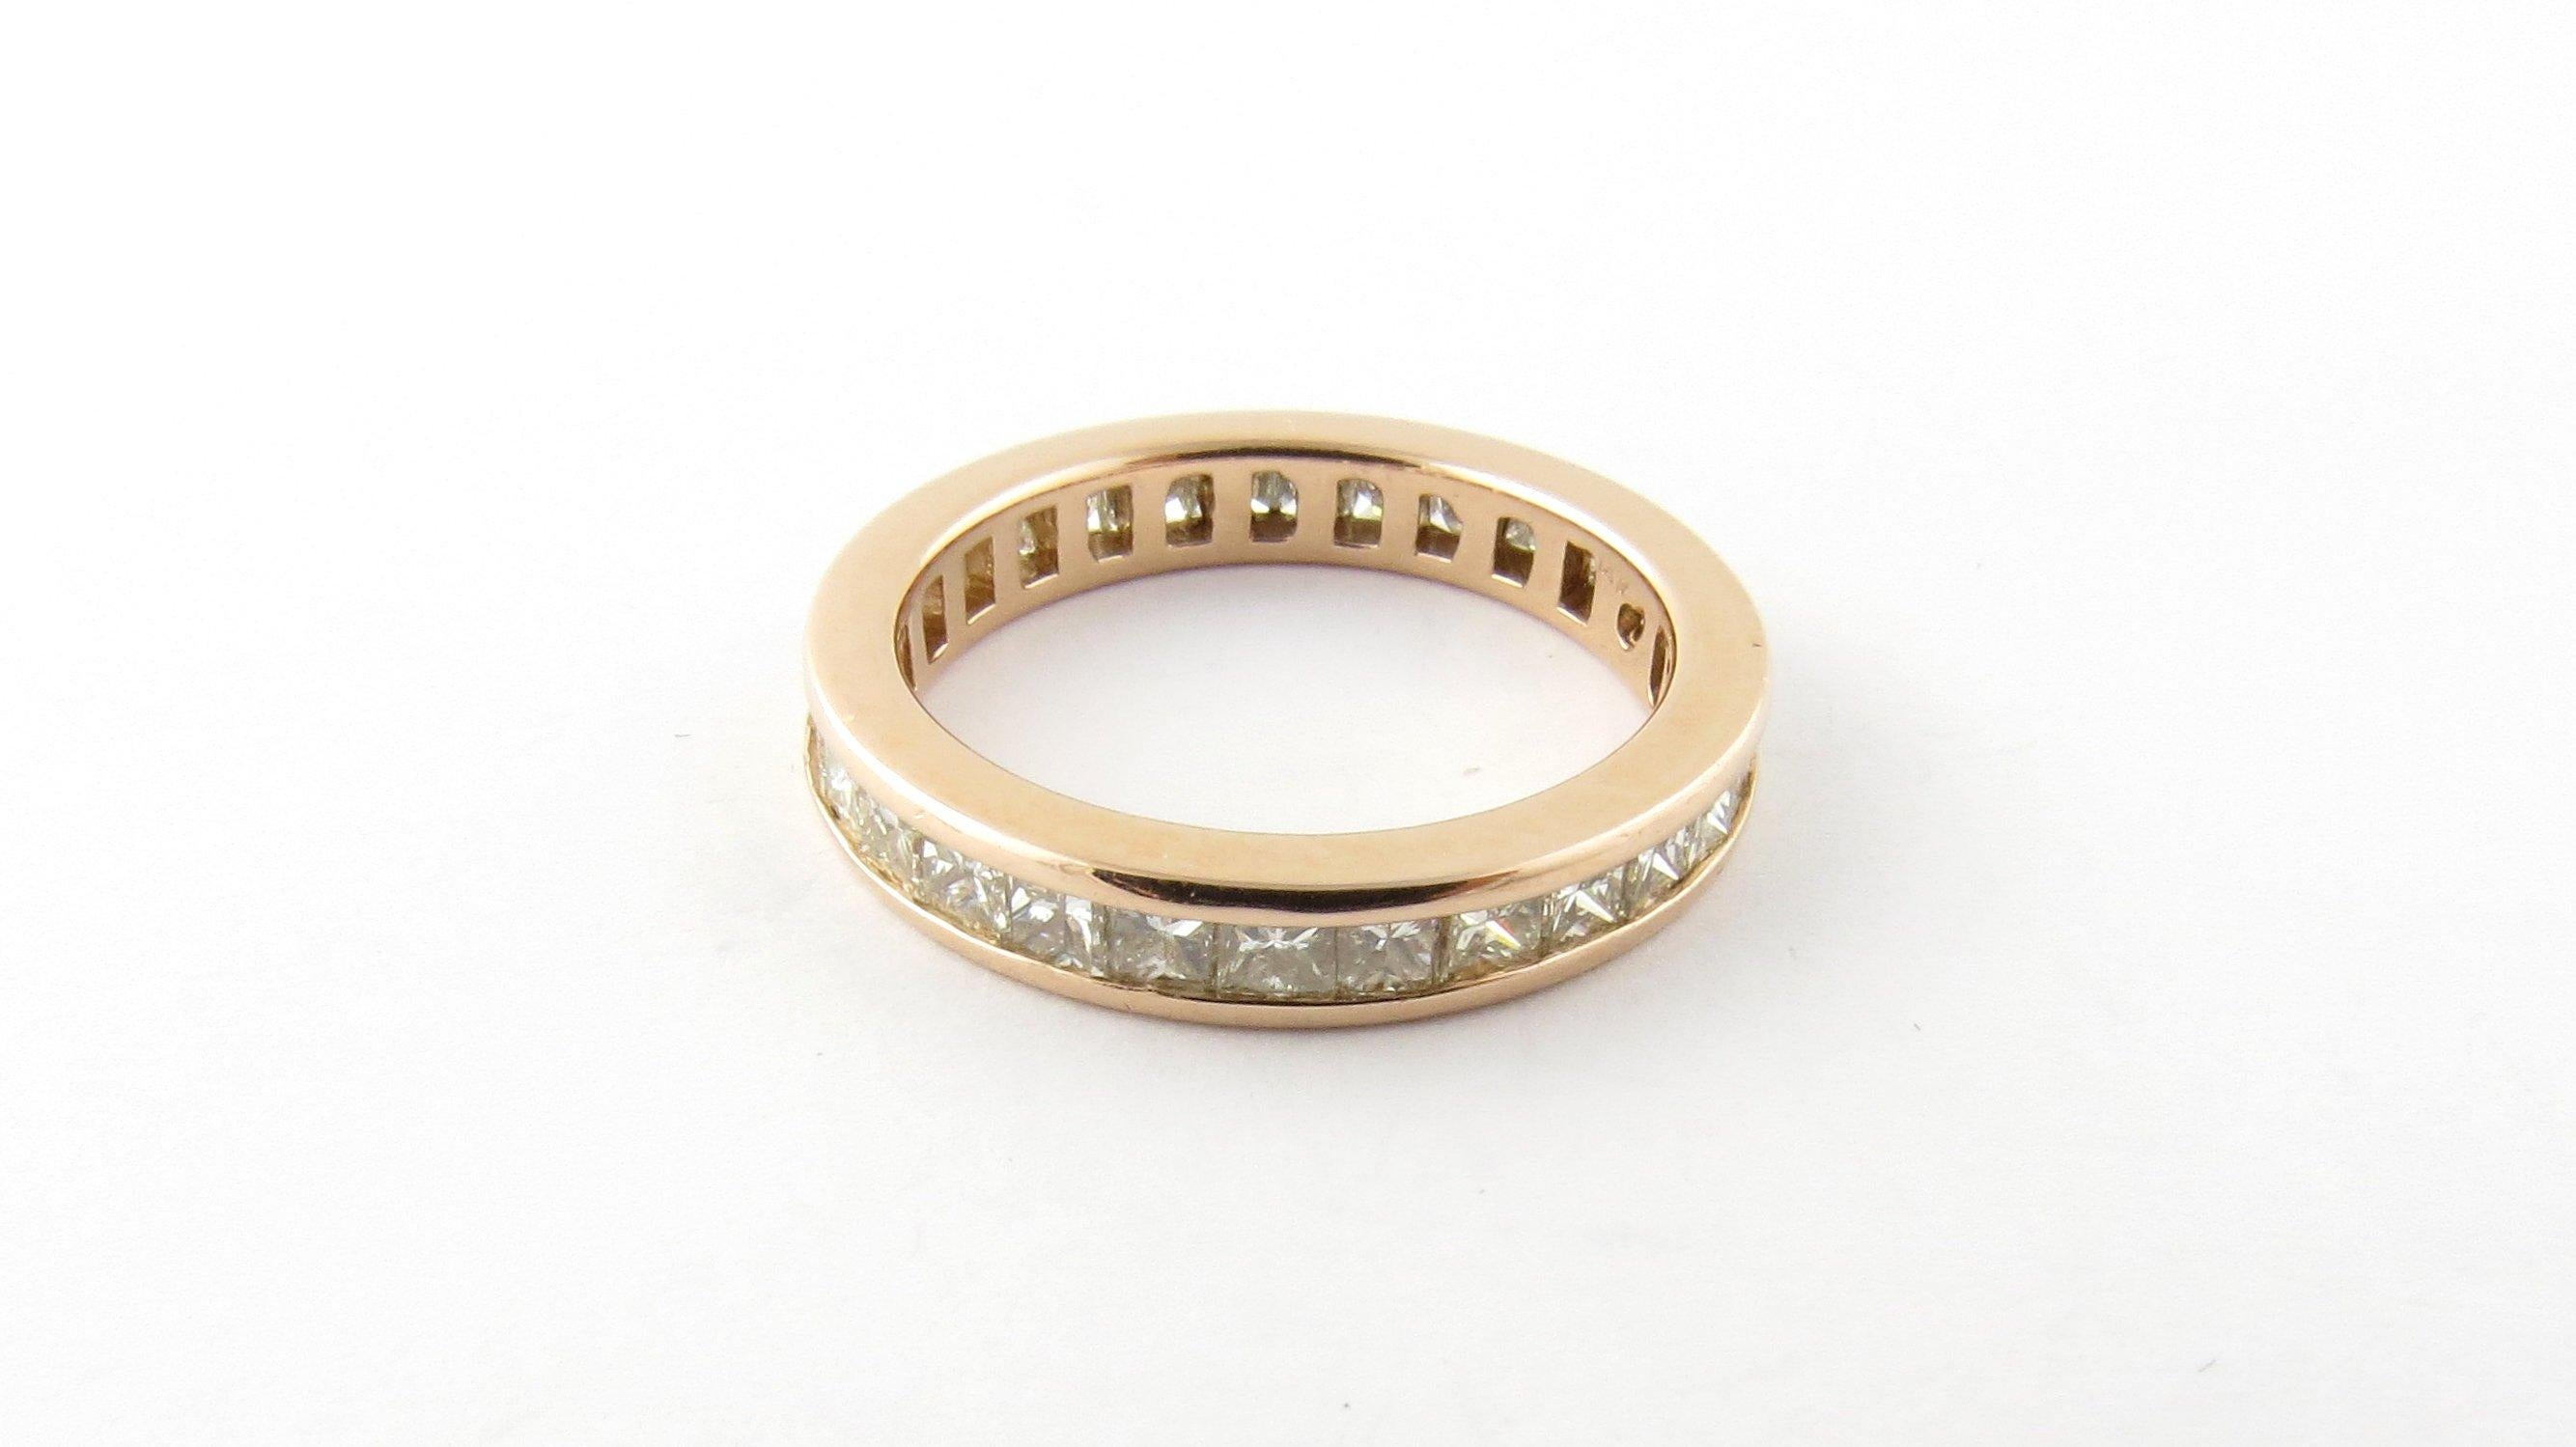 Vintage 14 Karat Yellow Gold Princess Diamond Wedding Band Ring Size 6.25. This sparkling wedding band features 25 princess cut diamonds set in classic 14K yellow gold. 
Approximate total diamond weight: 1.25 cts. Diamond color: H-I. Diamond